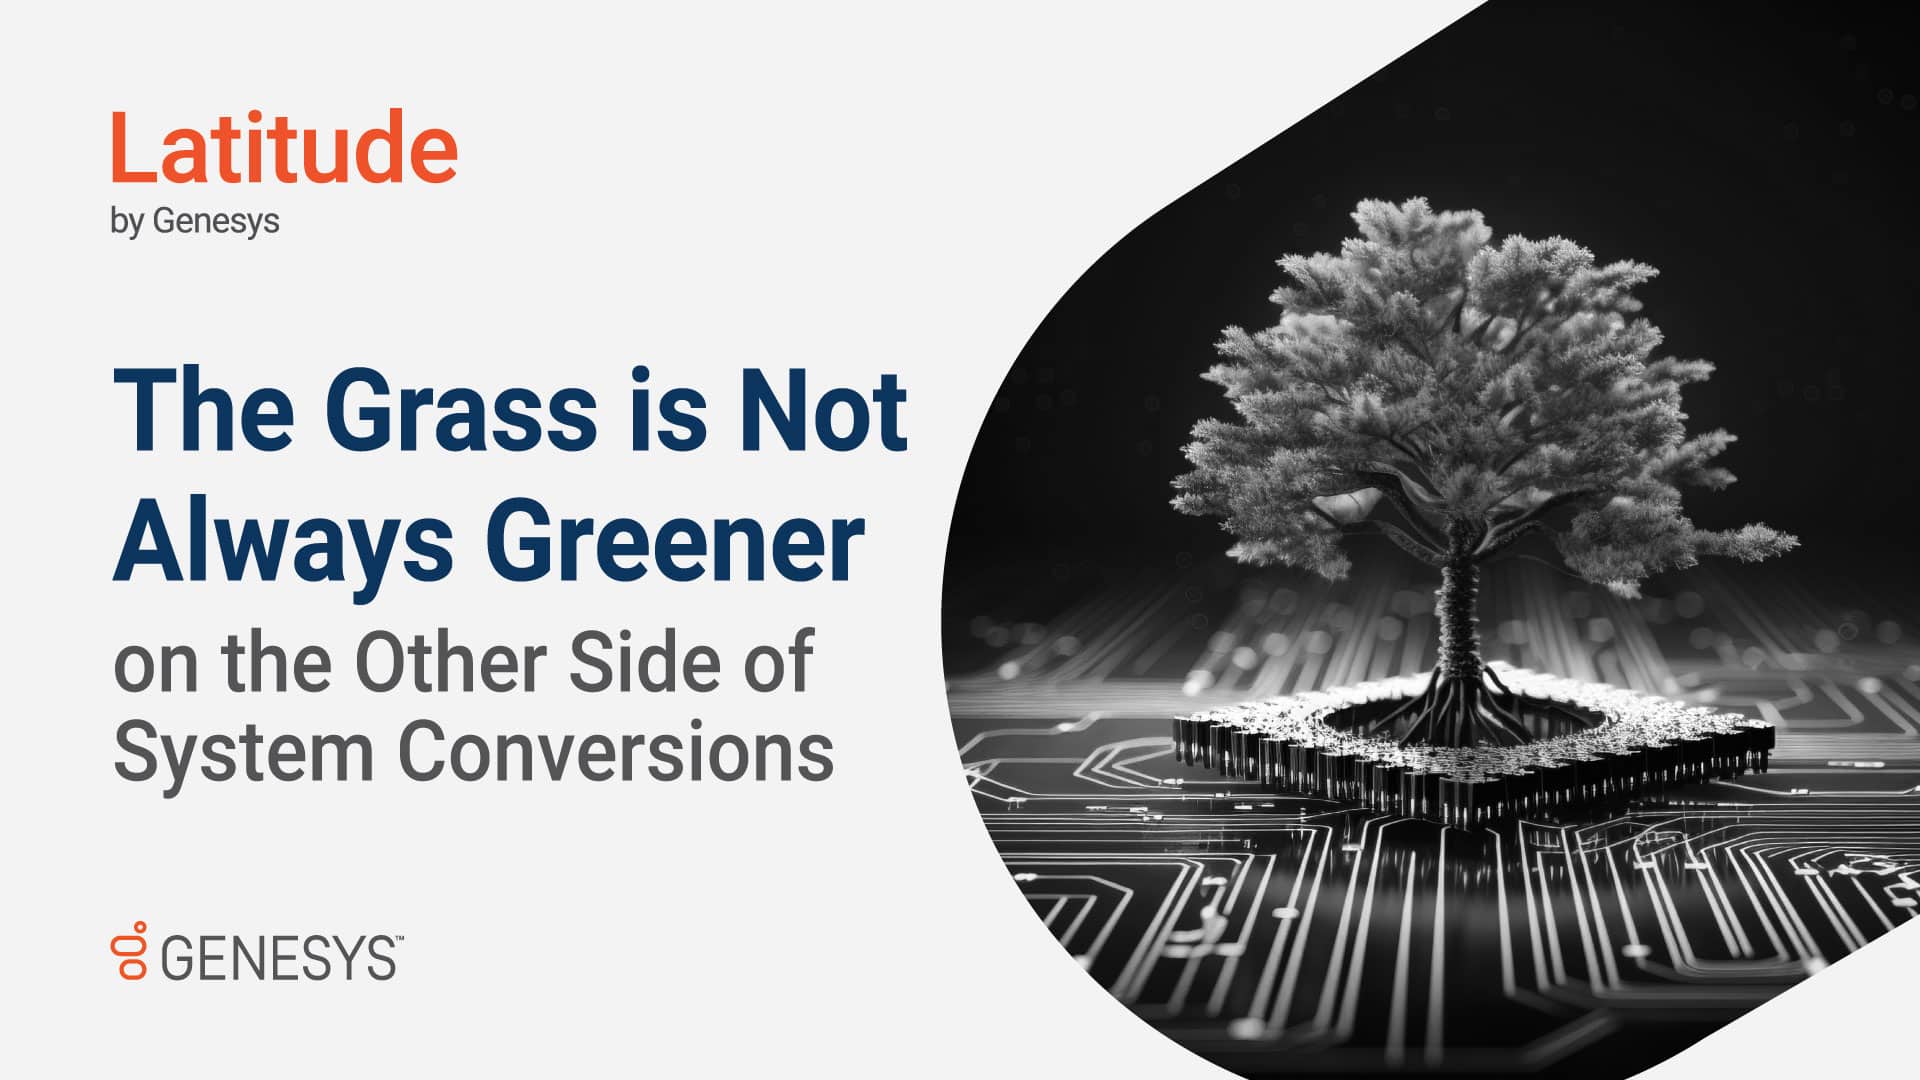 The Grass is Not Always Greener on the Other Side of System Conversions